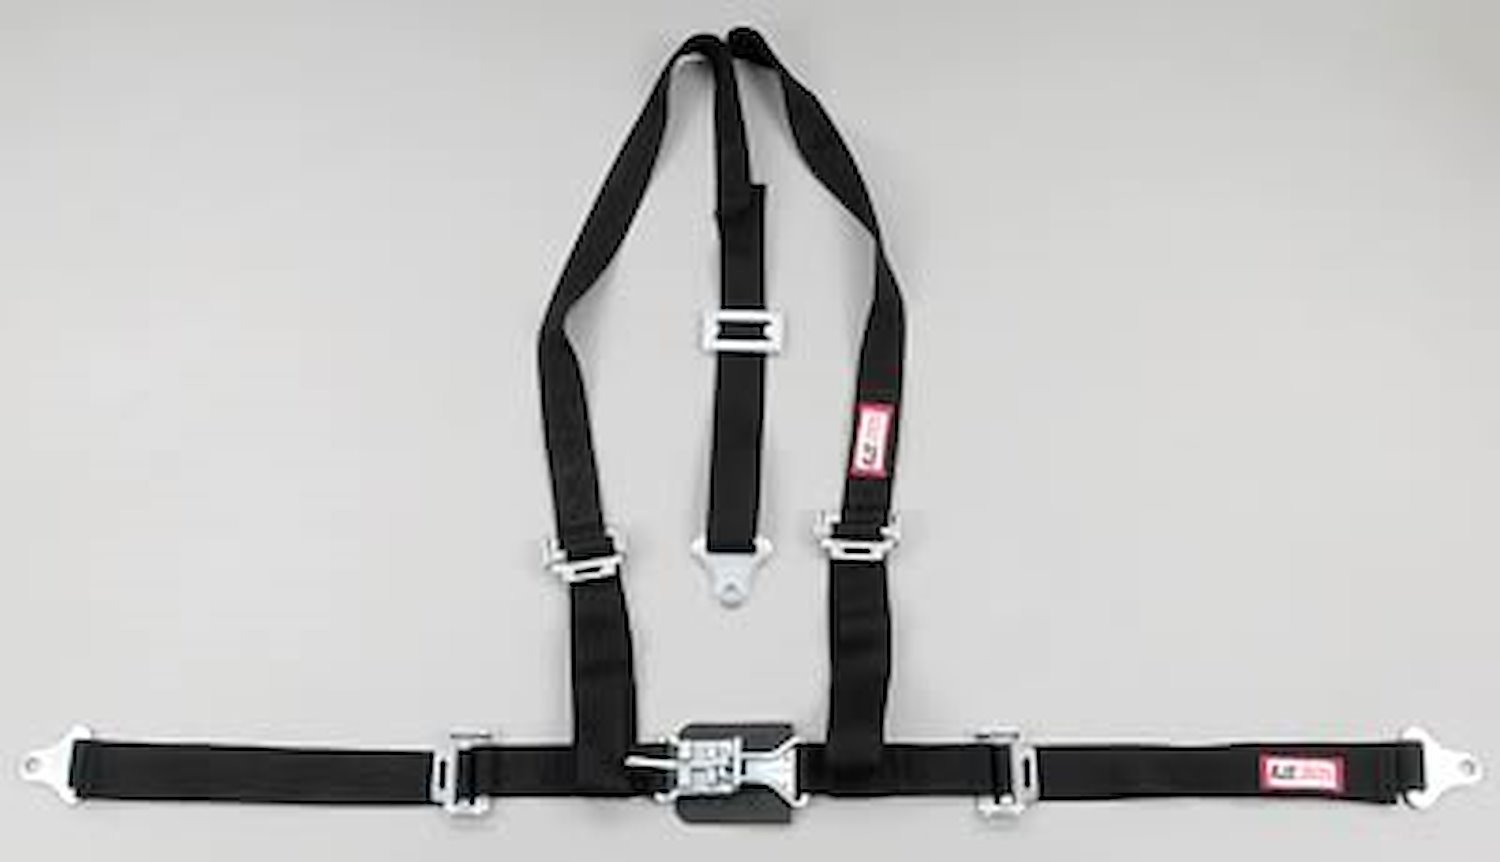 NON-SFI L&L HARNESS 2 PULL UP Lap Belt w/adjuster 2 S.H. V ROLL BAR Mount ALL SNAP ENDS GRAY